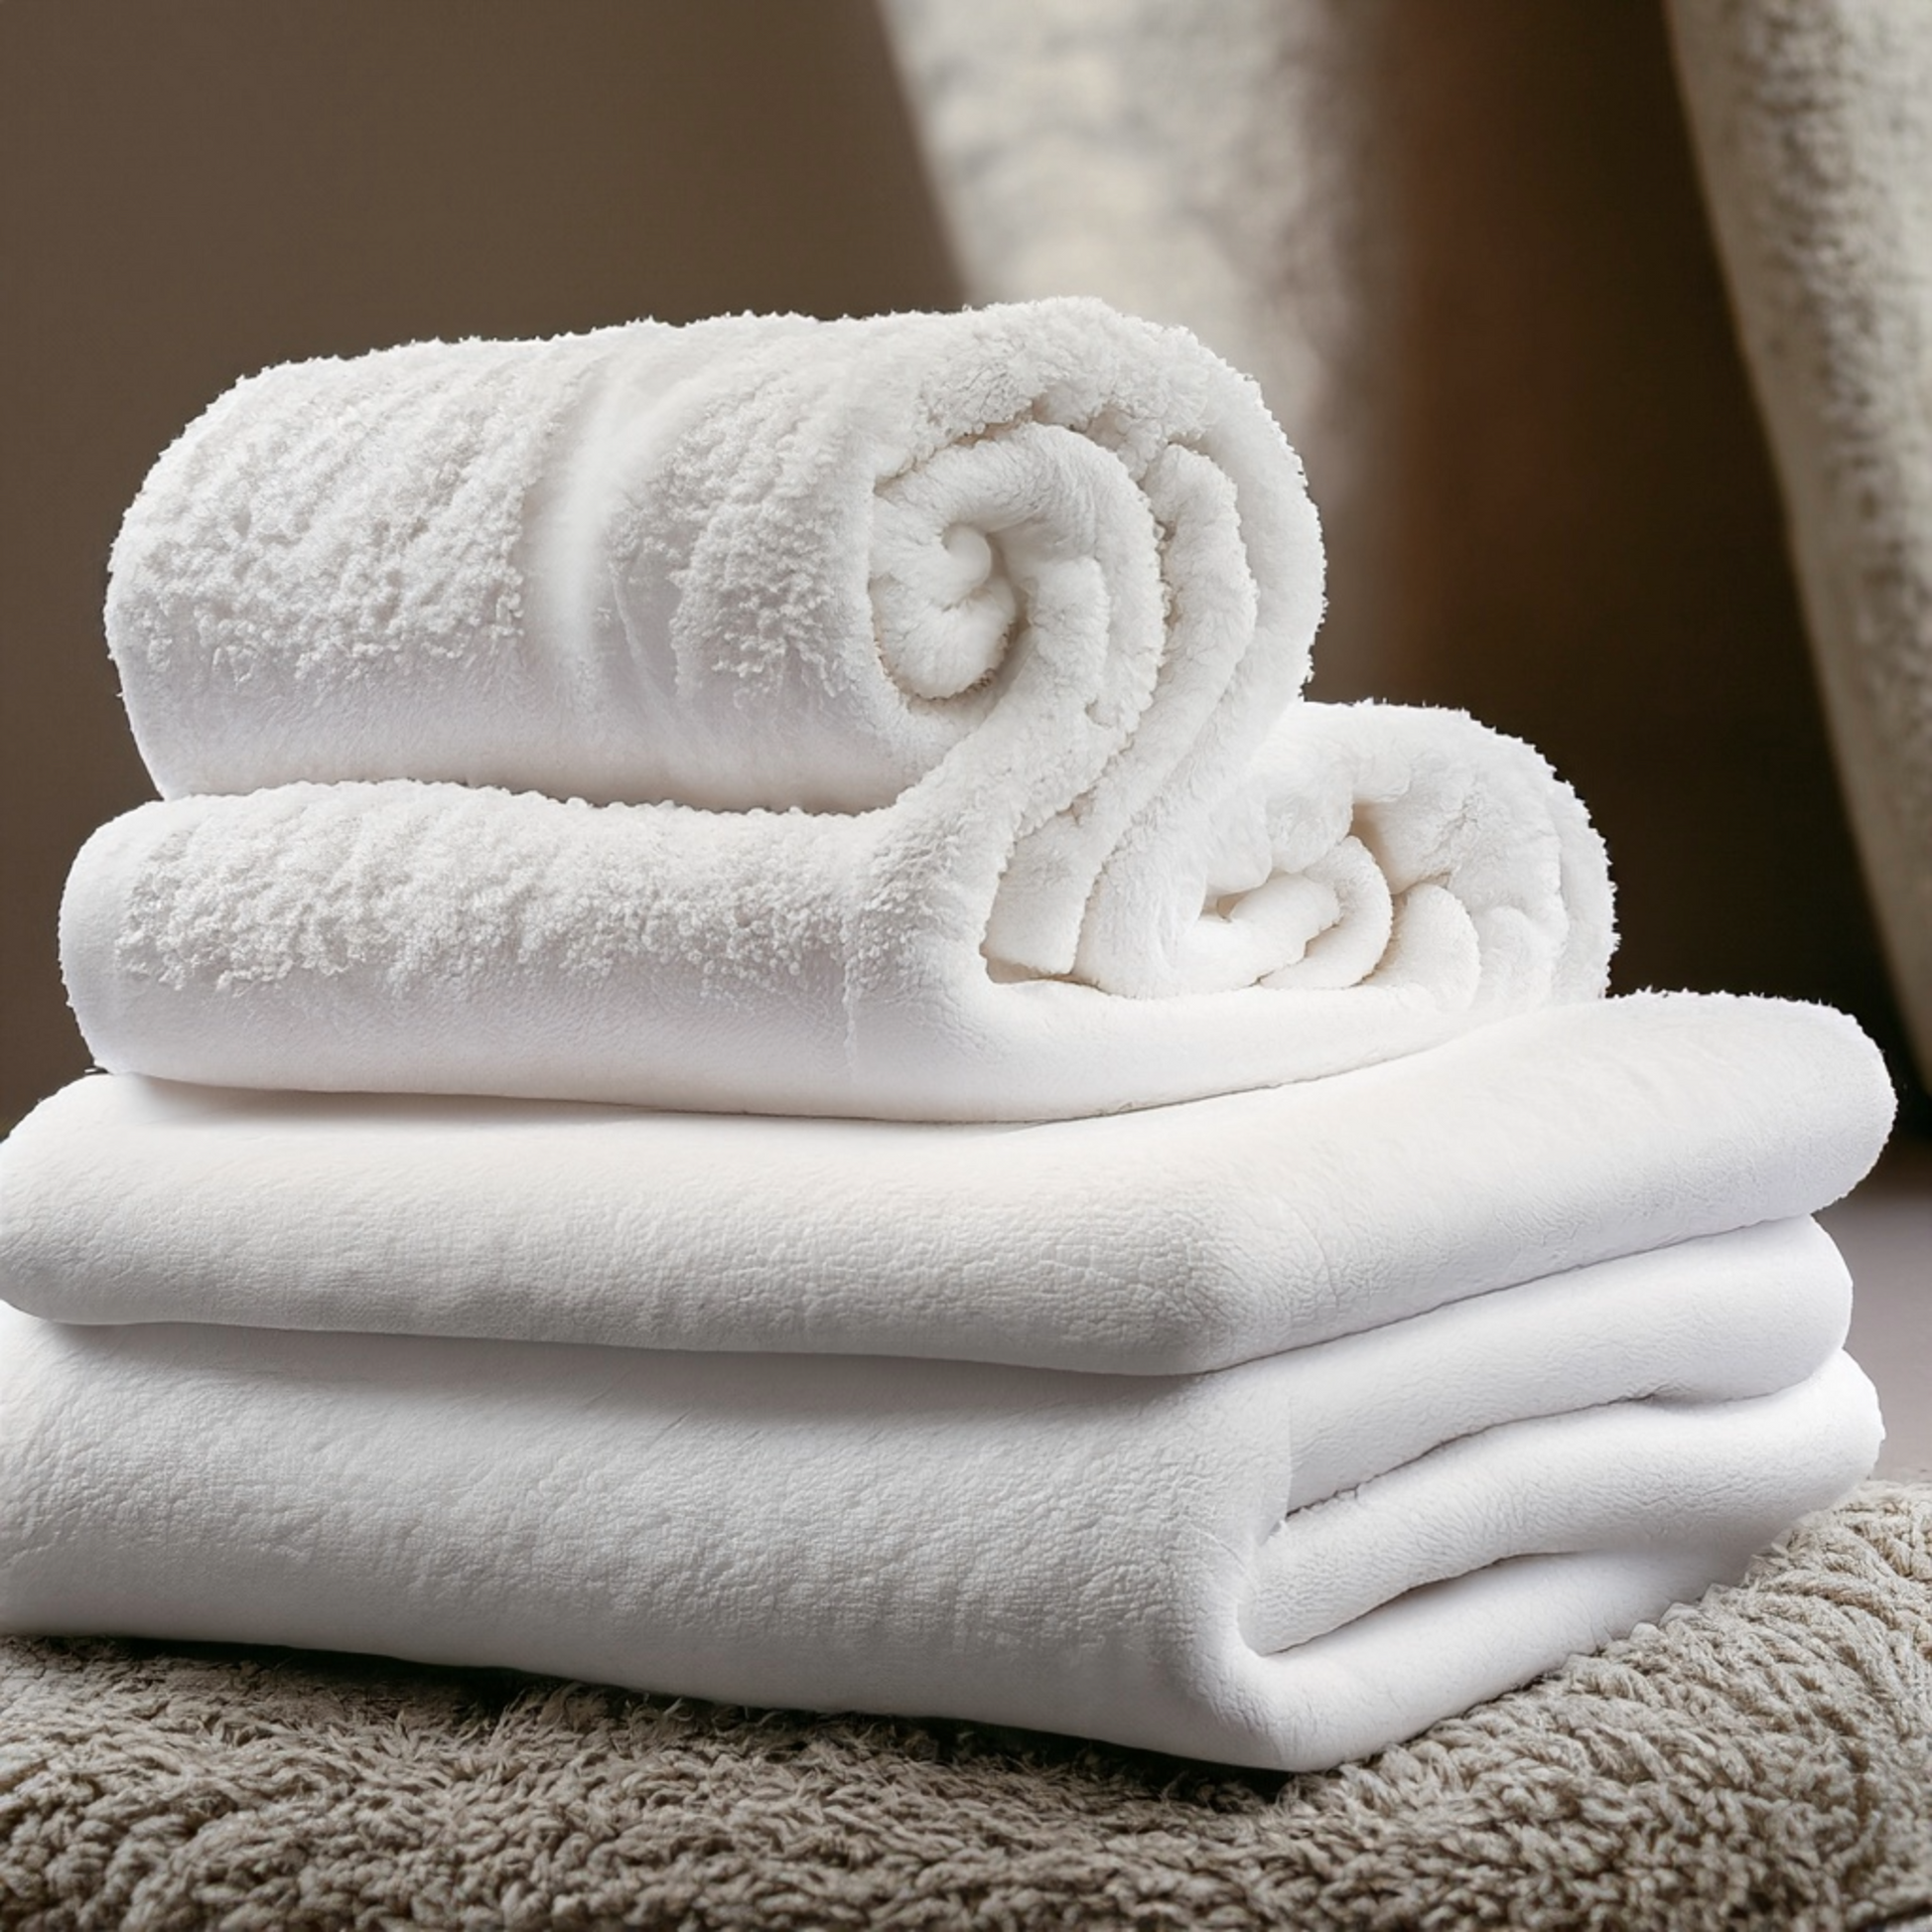 BY LORA Luxury 4-Piece Terry Cotton Bath Towel Set - Chemical-Free- Soft,  Absorbent, Eco-Friendly Towels for Bath and Spa, White, Set of 4